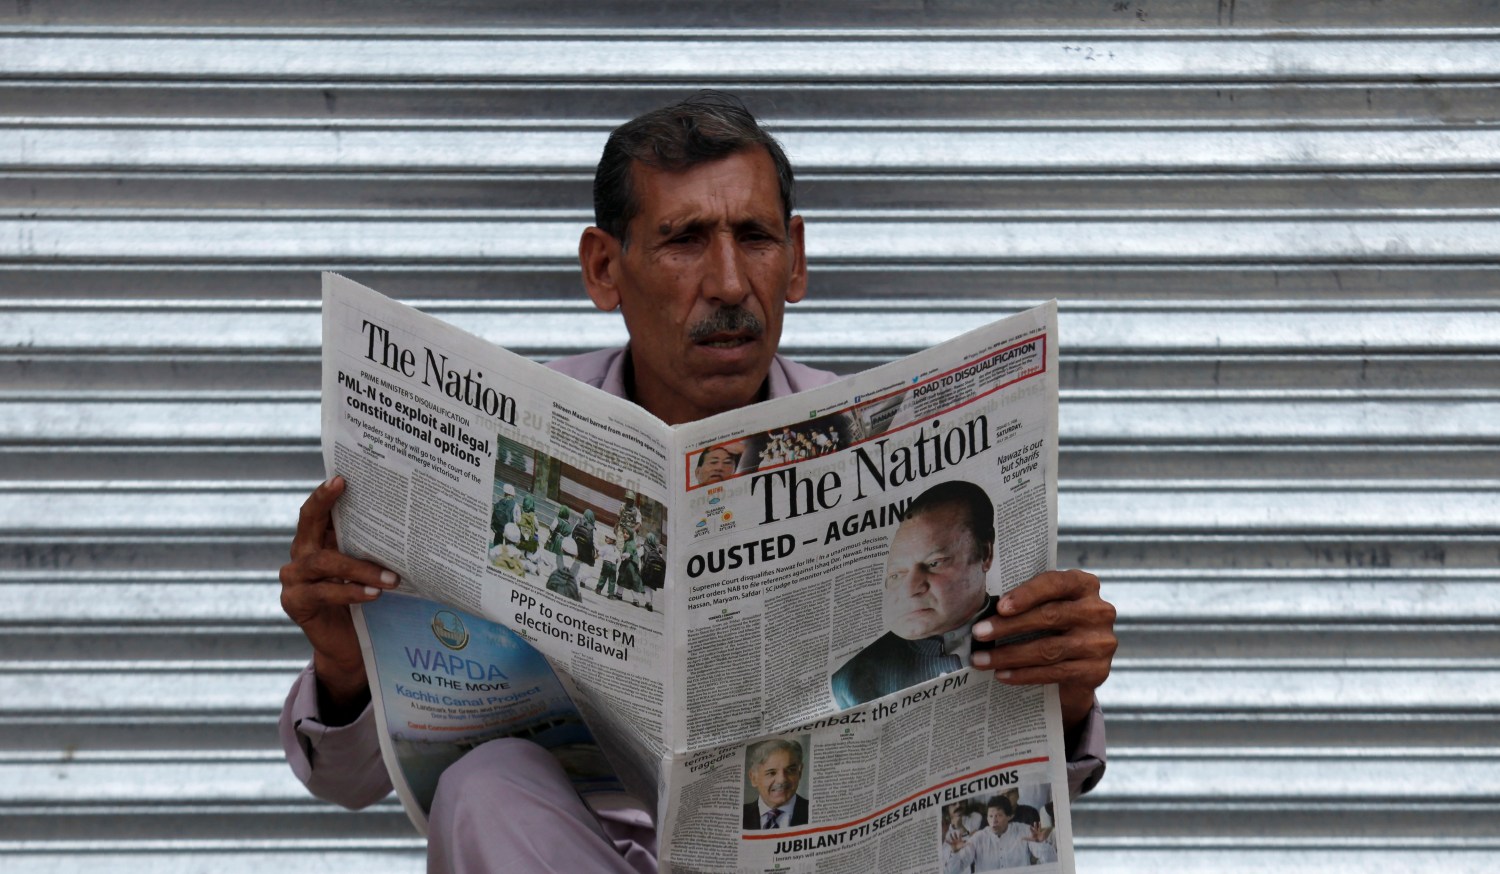 DATE IMPORTED:July 29, 2017A man reads a newspaper with news about the disqualification of Pakistan's Prime Minister Nawaz Sharif by the Supreme Court, in Peshawar, Pakistan July 29, 2017. REUTERS/Fayaz Aziz